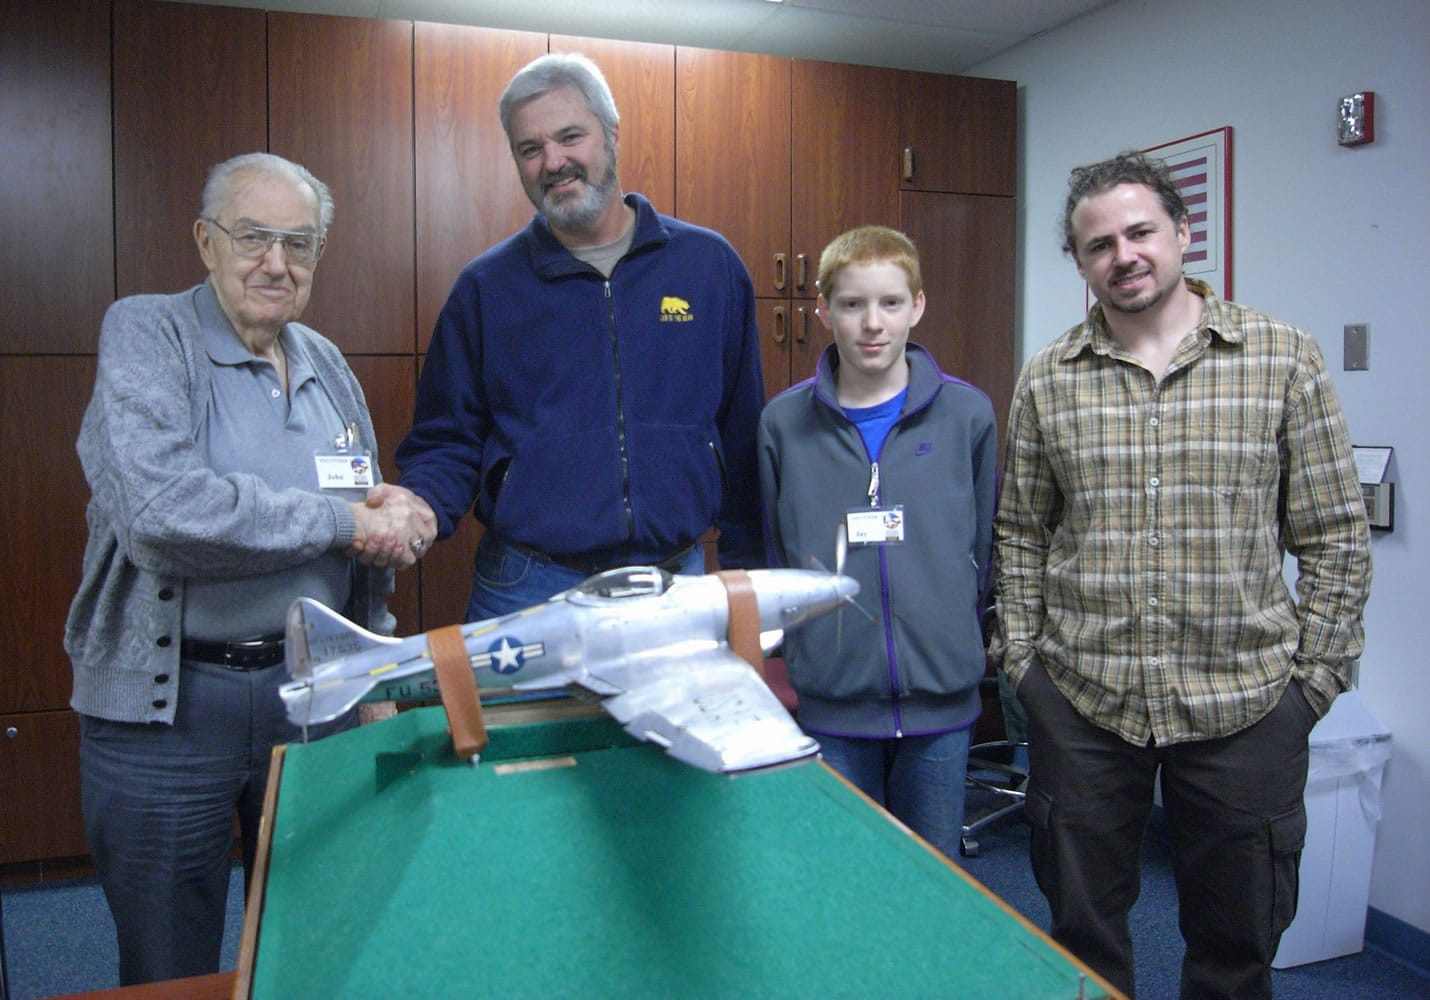 Hudson's Bay: Pearson Air Museum volunteer John Kalde, left, shakes hands with George Humphries, who loaned the museum a fighter plane model for the new Tuskegee Airmen display.